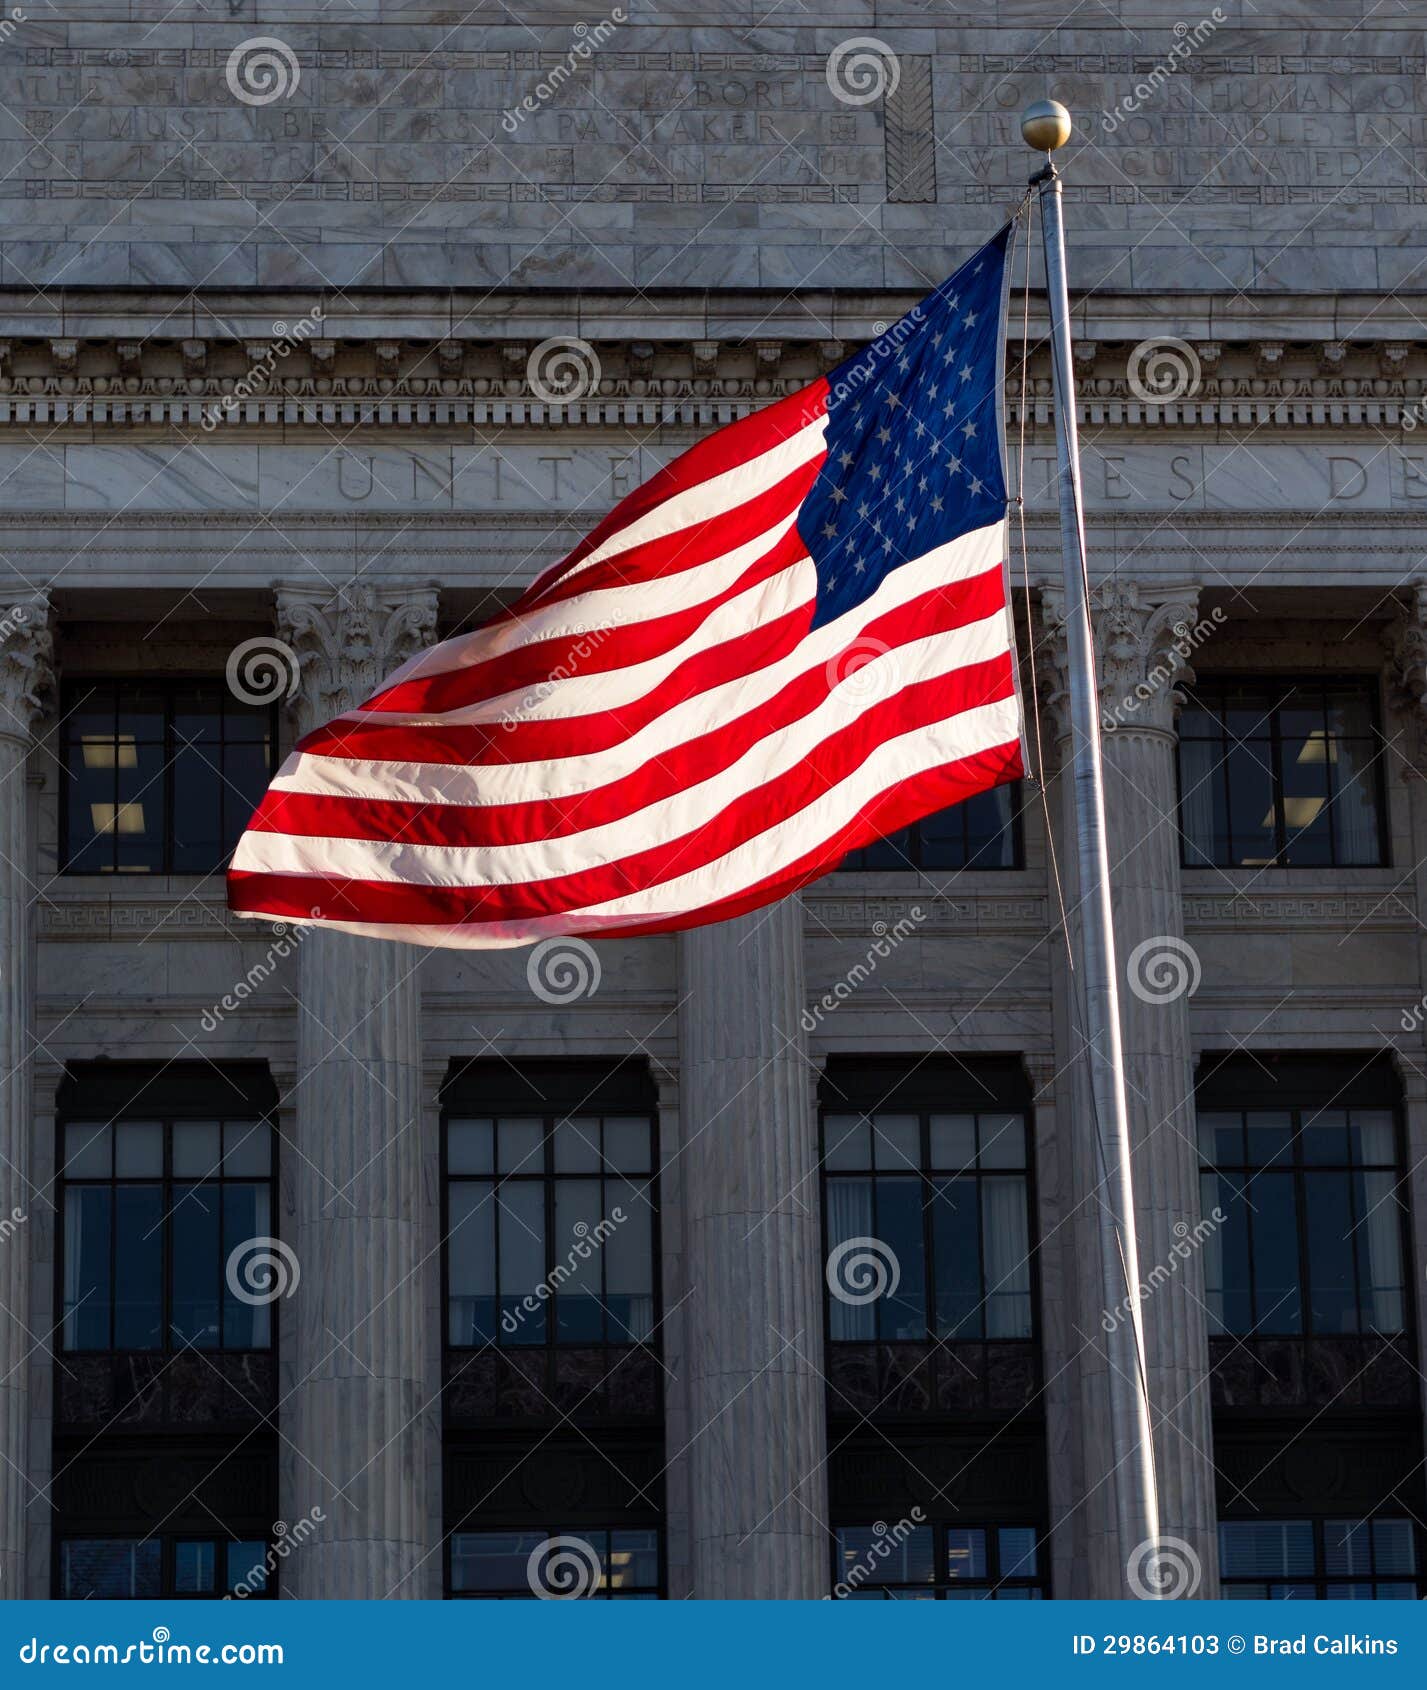 American flag stock image. Image of patriotism, flags - 29864103